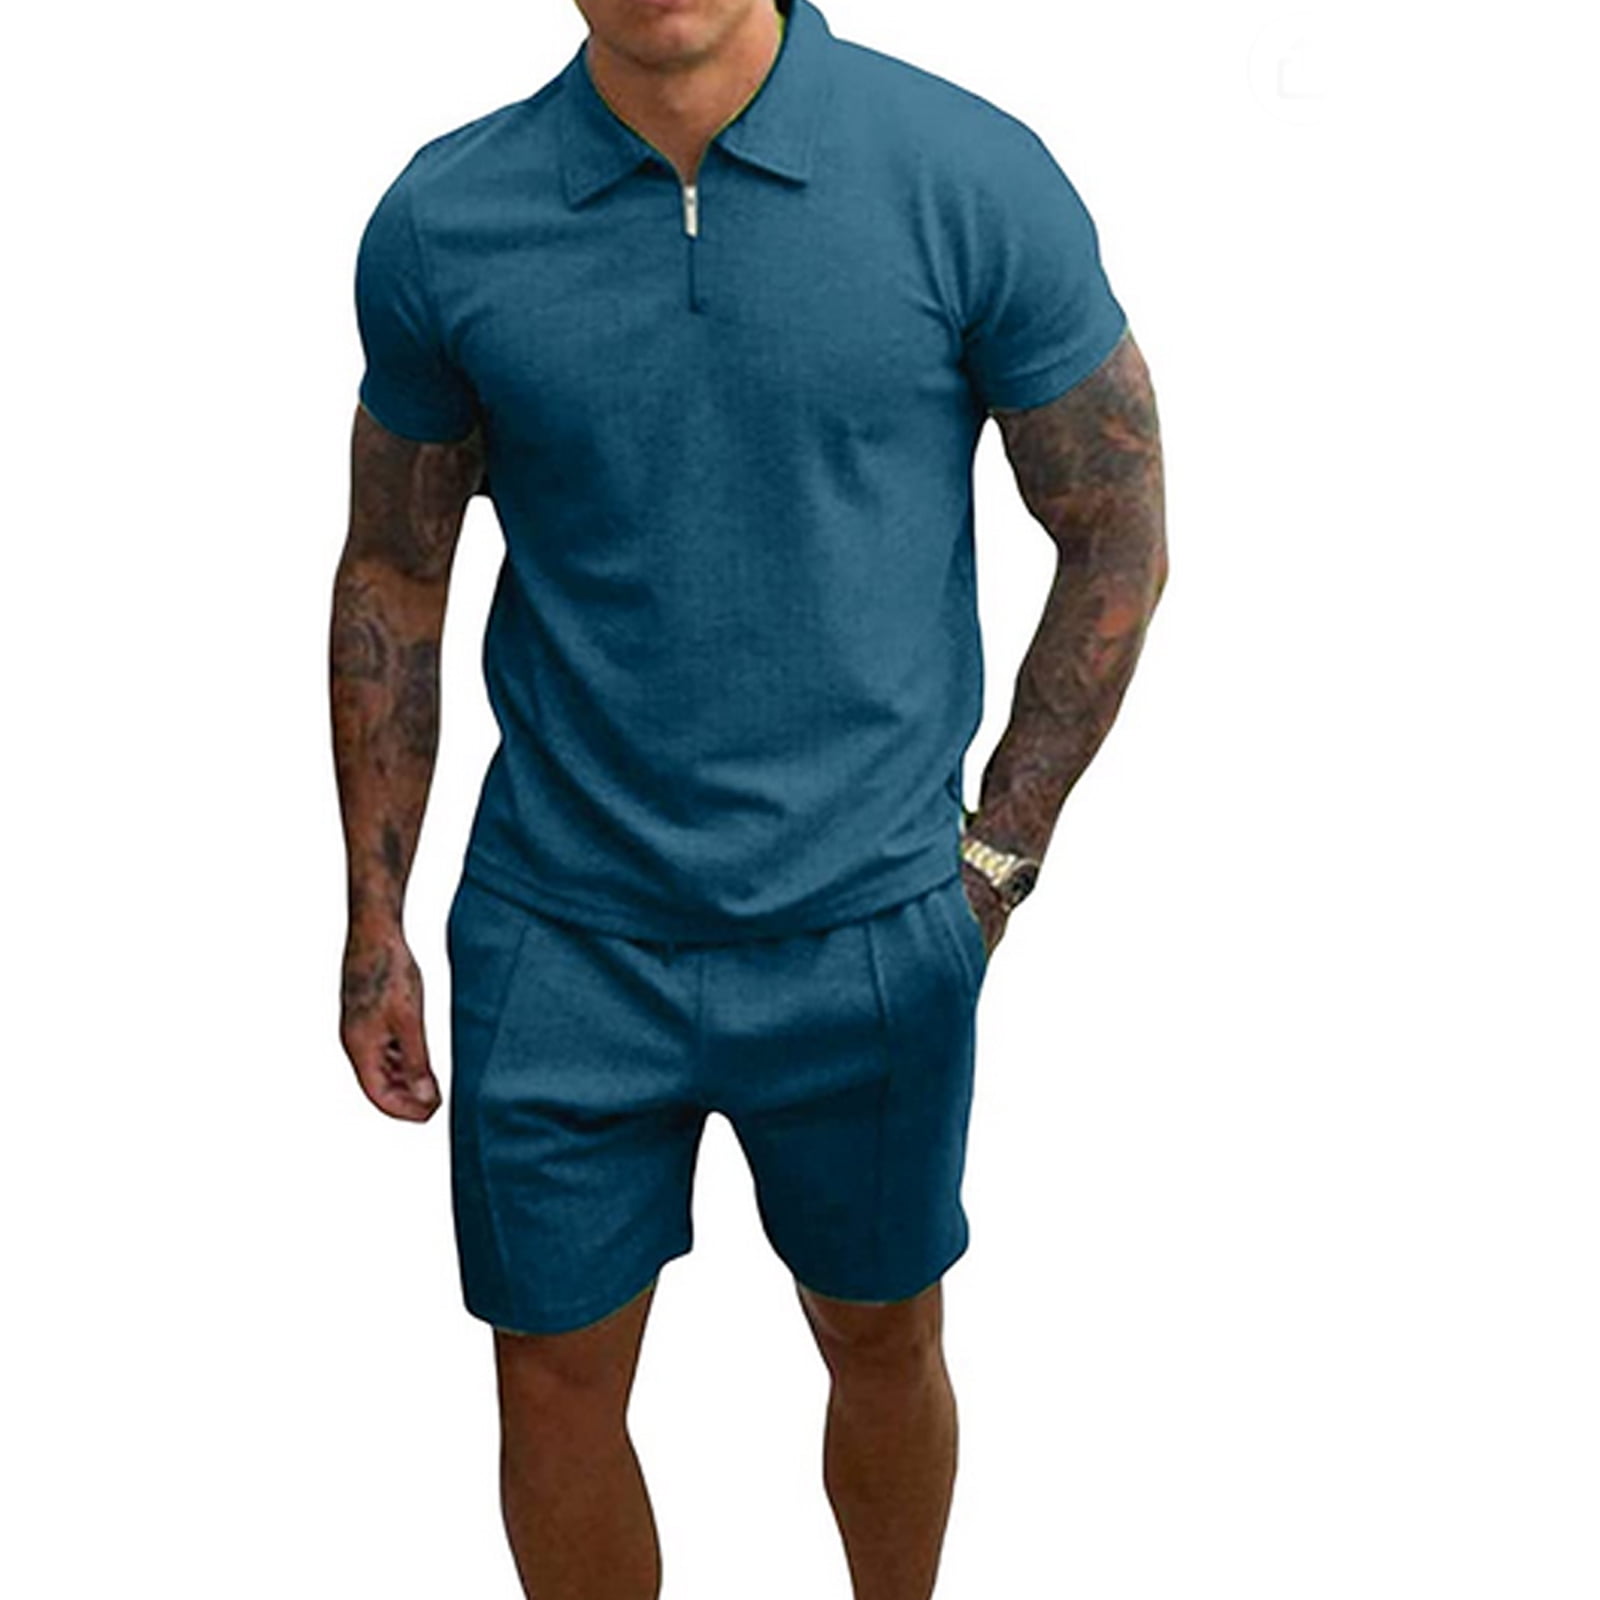 Men Summer Sports Suit Outfits 2 Piece Tracksuit Short Sleeve T Shirts and Shorts Stylish Casual Sweatsuit Set